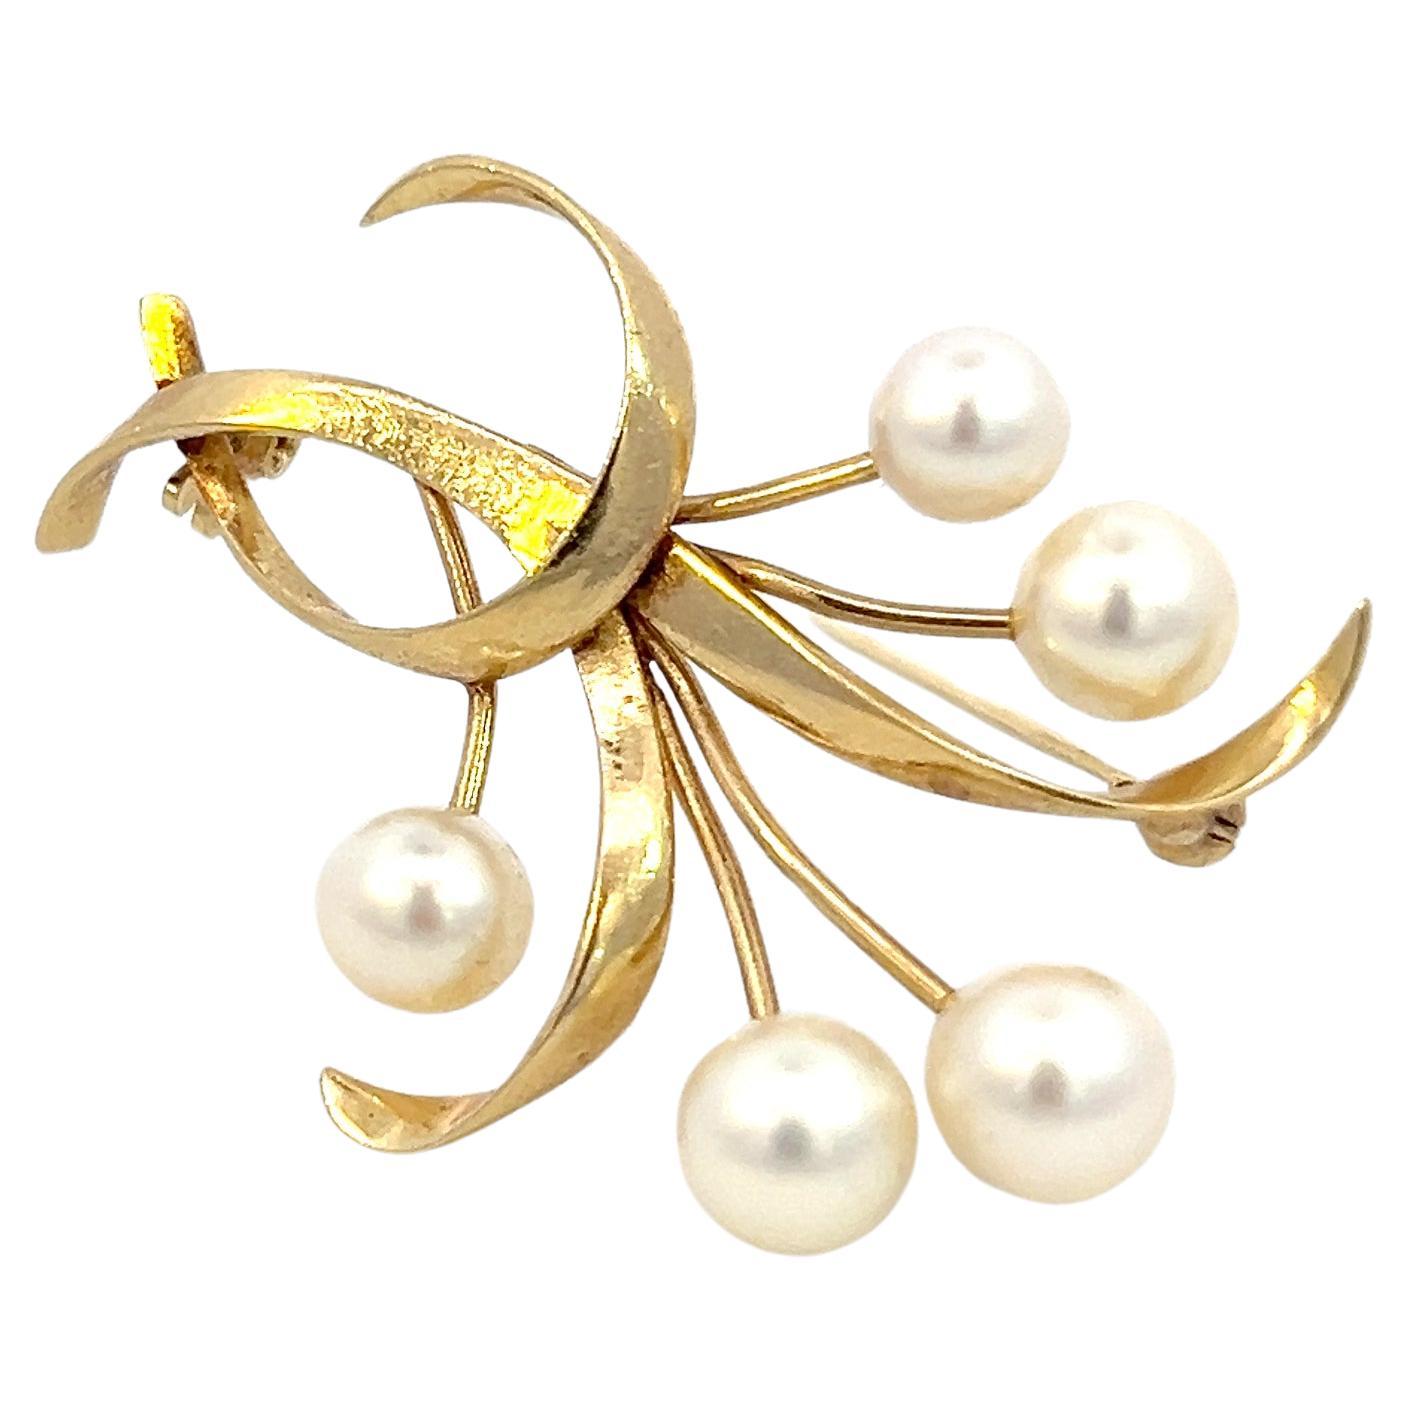 Mikimoto Estate Akoya Pearl Brooch 1.5 x 1" 14k Y Gold 6.60-5.50 mm  For Sale